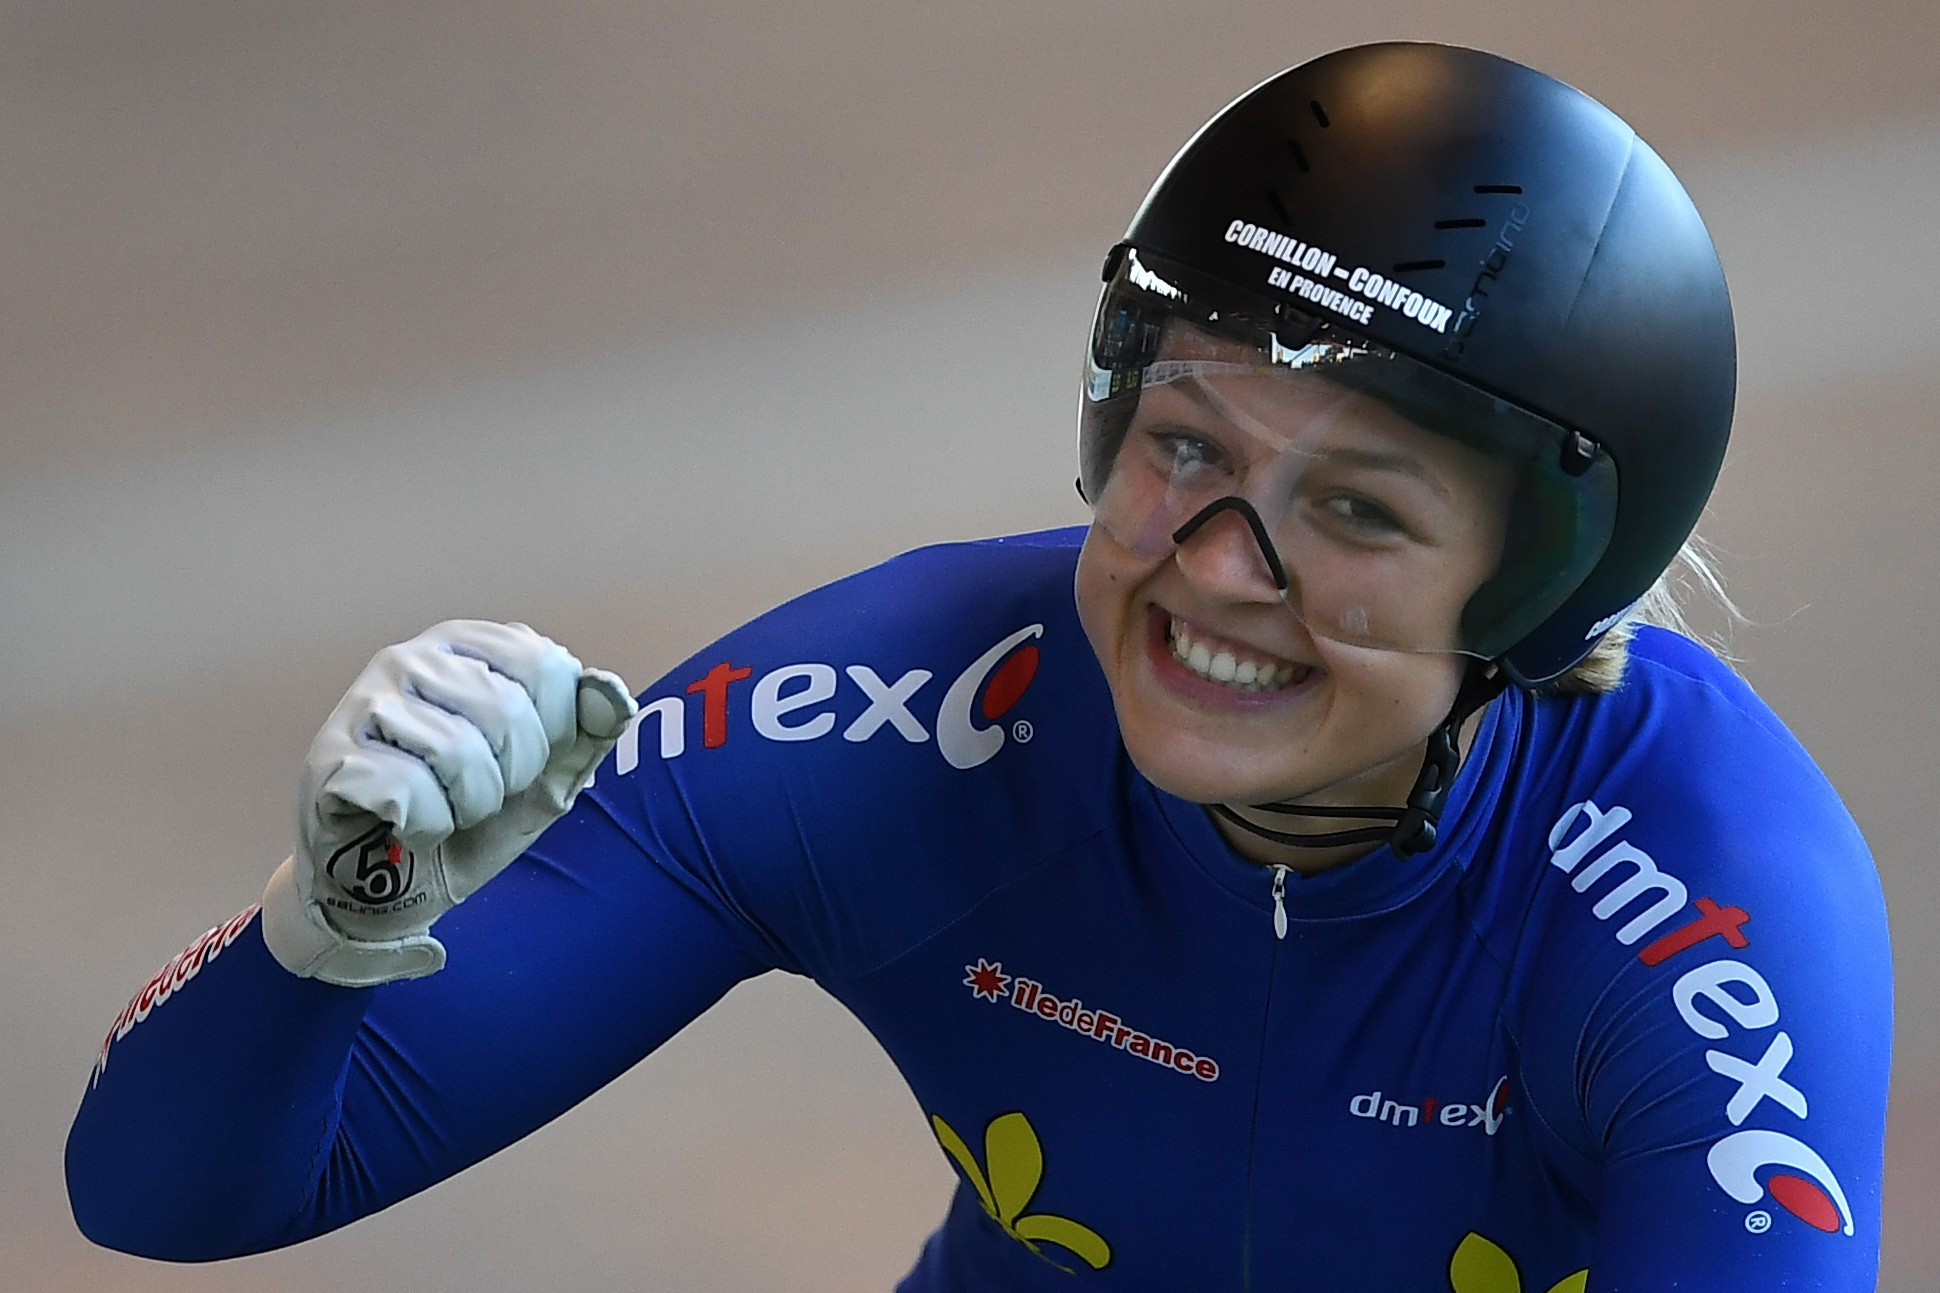 Gros and Paternoster win third gold medals as UCI Junior Track Cycling World Championships conclude